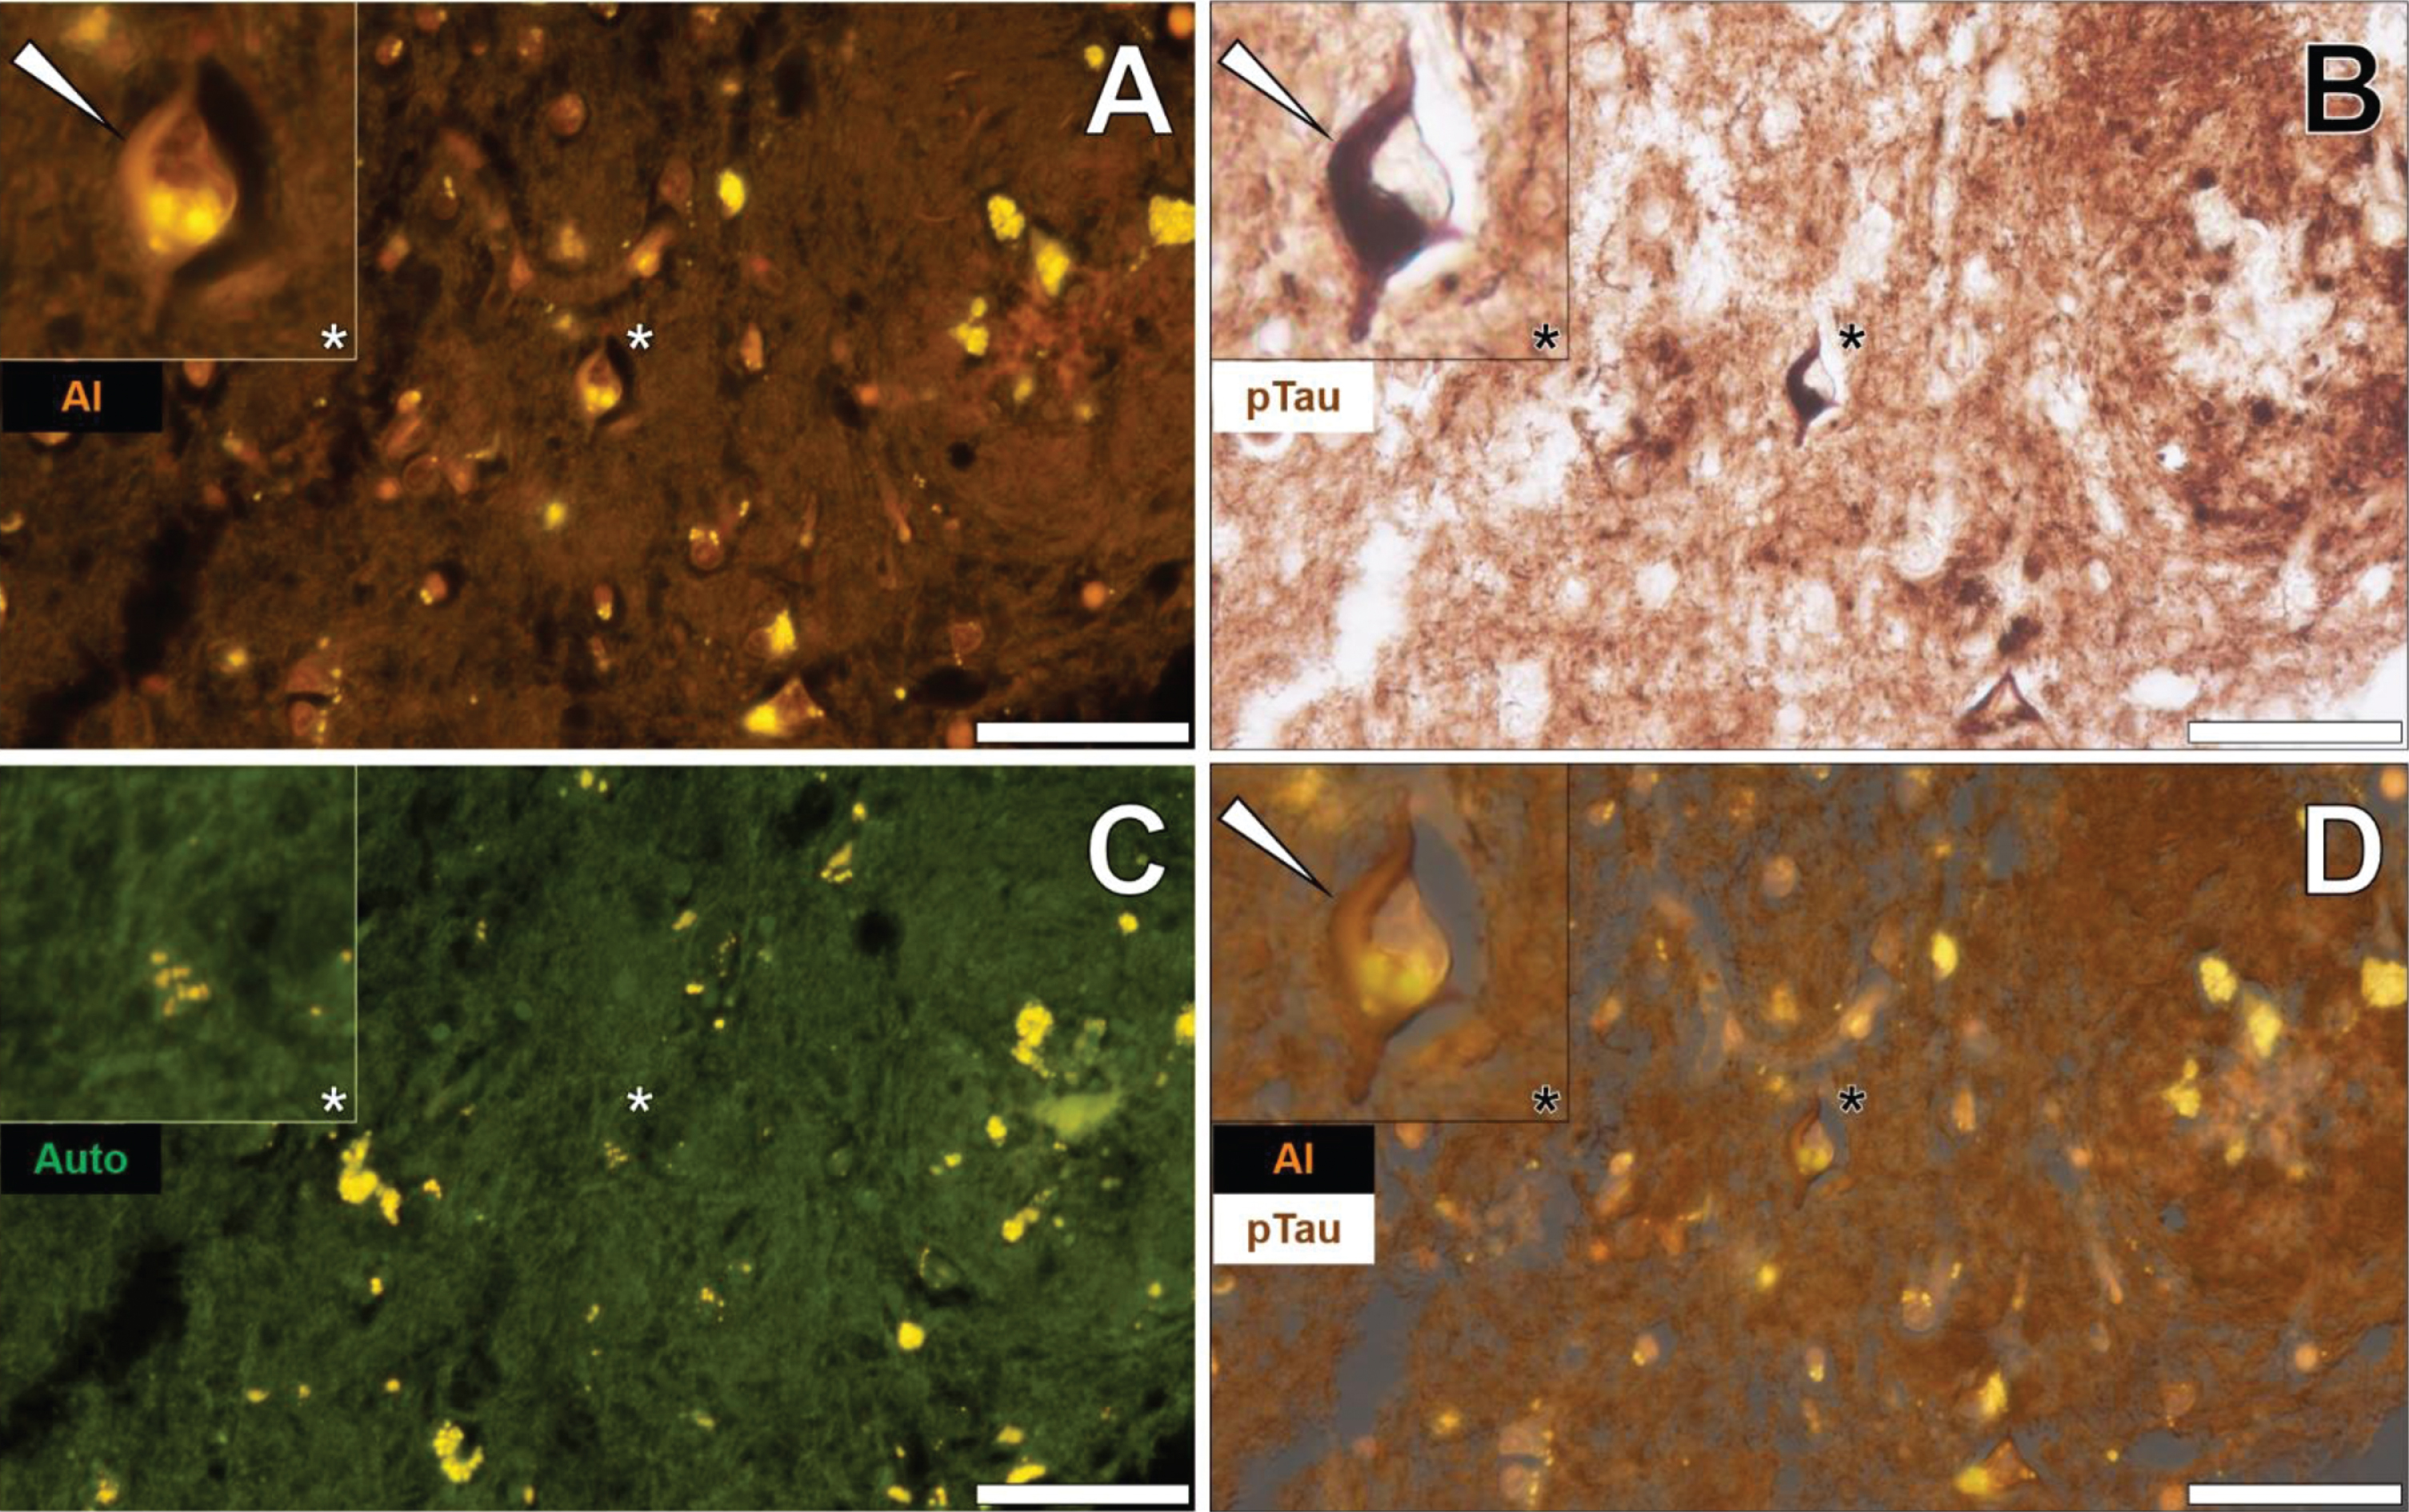 Intraneuronal aluminum in the temporal cortex of a 60-year-old male Colombian donor with familial Alzheimer’s disease. A) Intracellular aluminum (Al) in a neuron (orange). B) AT8 immunoreactive phosphorylated tau (pTau) located via DAB staining (brown) appearing as flame-like NFT. C). Autofluorescence (green) of the non-stained adjacent section highlighting occasional deposits of intracellular lipofuscin (yellow). D) Merging of lumogallion and brightfield channels depicting aluminum and pTau co-localized in the identical neuron. Asterisks denote magnified inserts. Magnification: X 400, scale bars: 50μm.